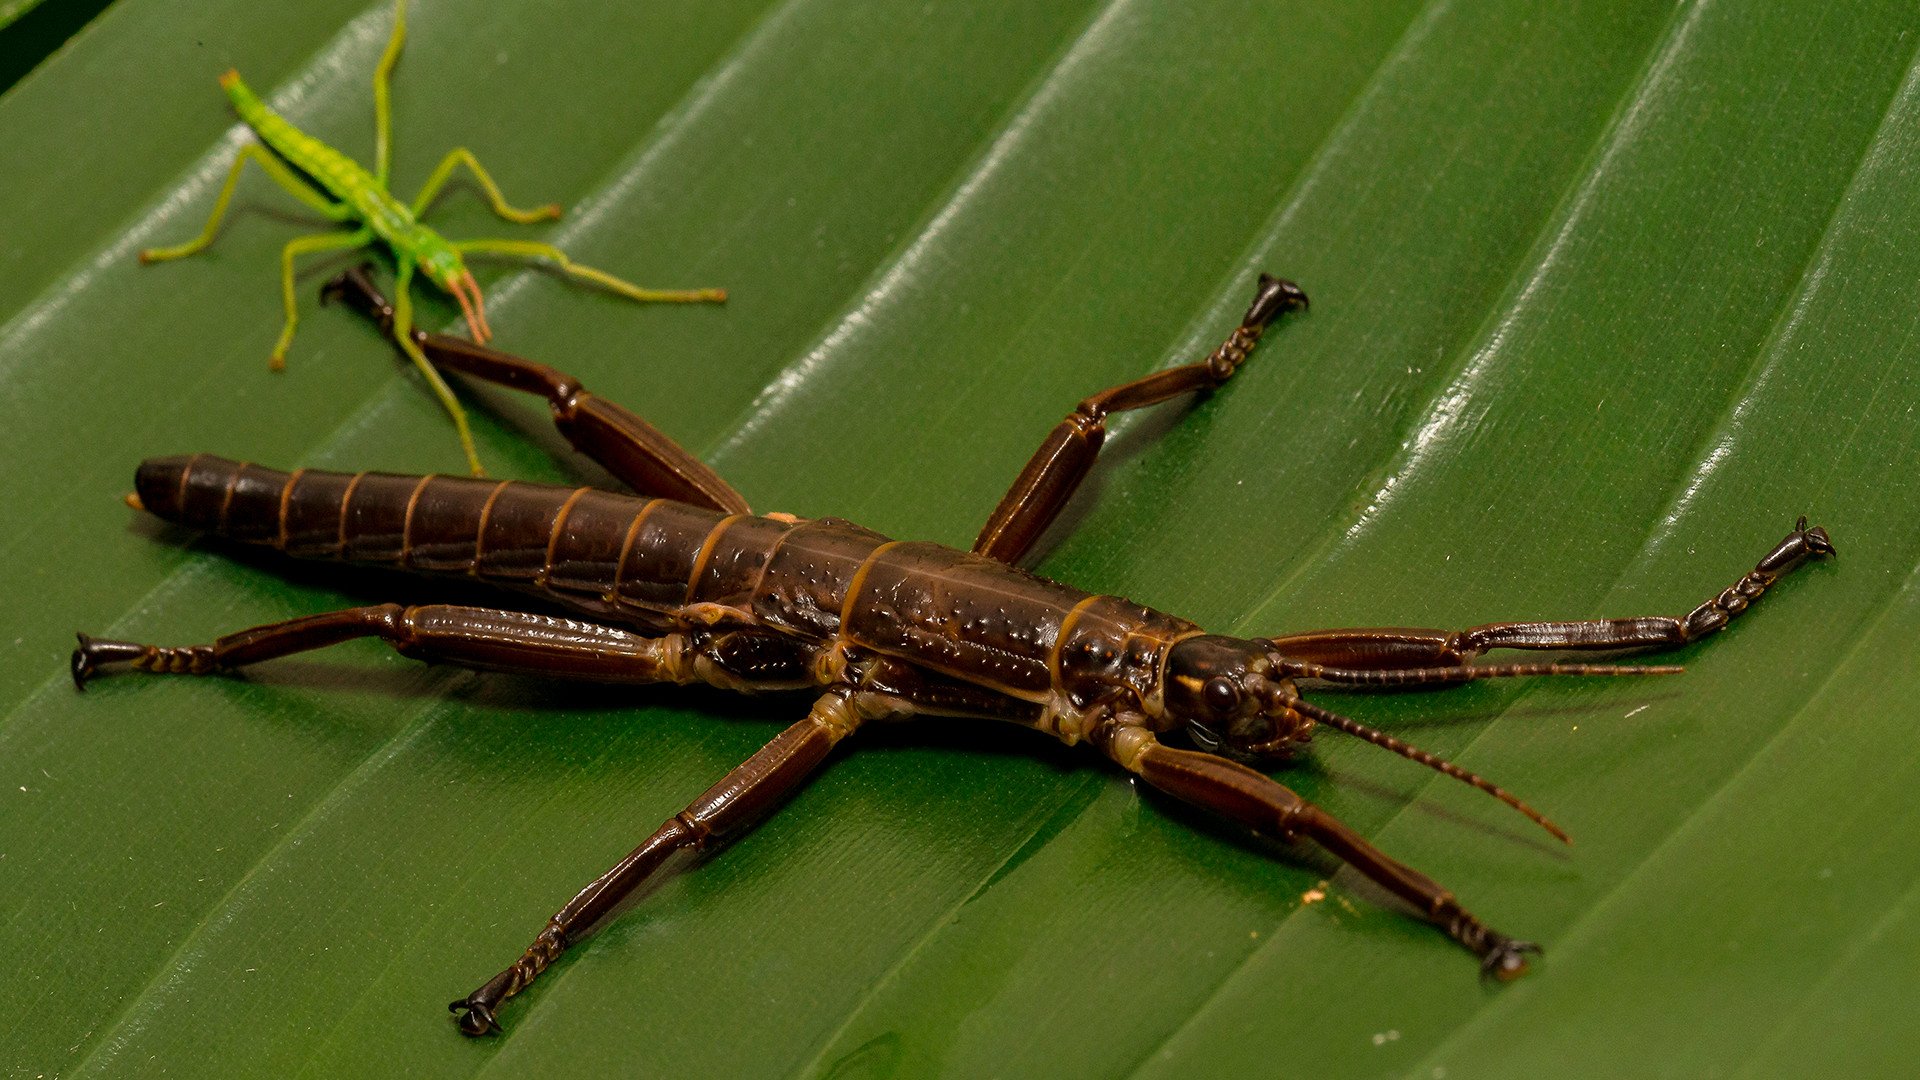 The Lord Howe Island Stick Insect Is